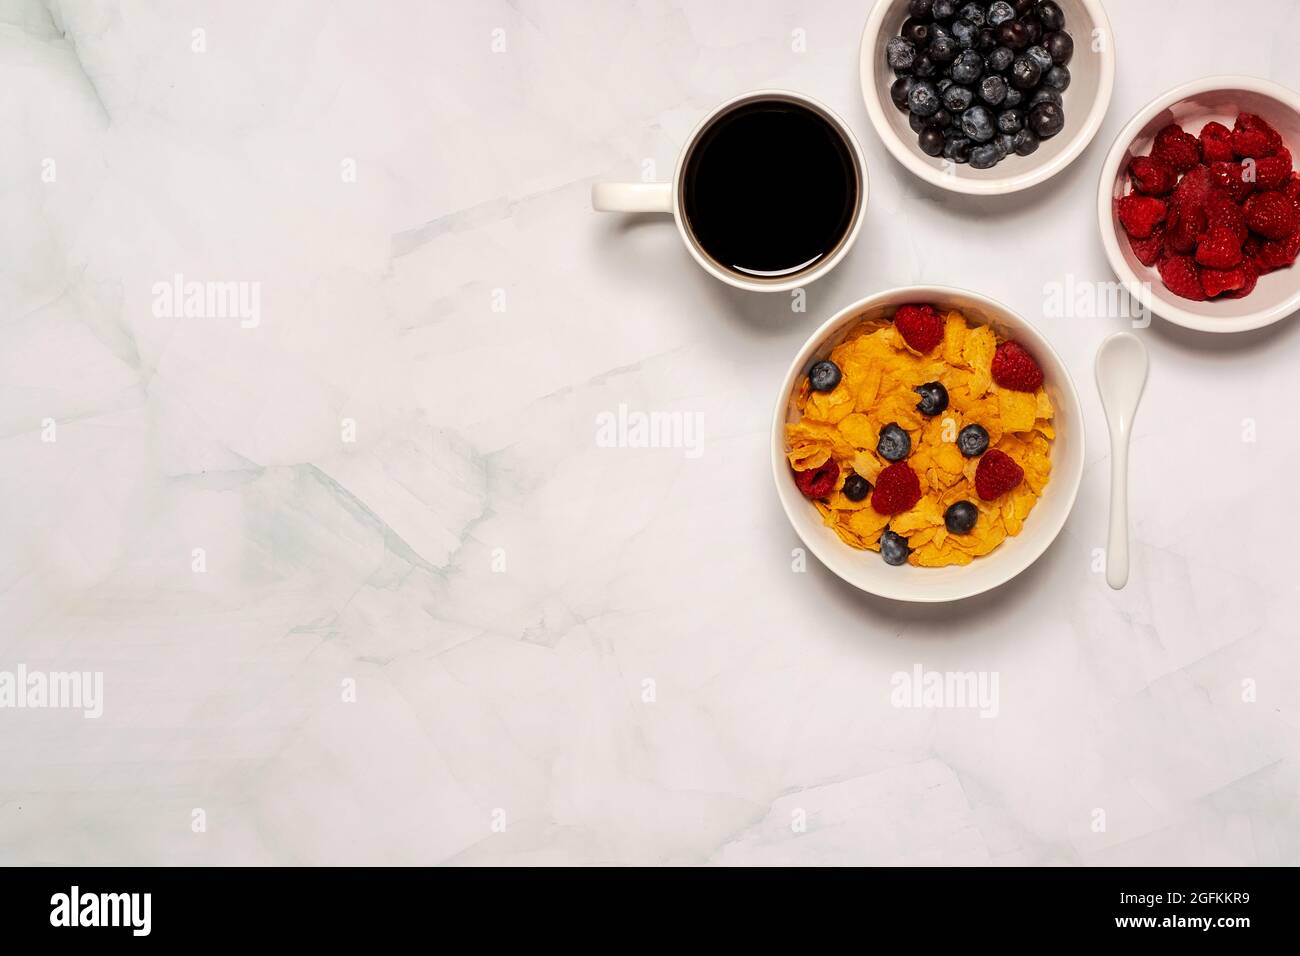 Working morning breakfast of cornflakes cereal with raspberries and blueberries with black coffee and a bagel with cream cheese Stock Photo